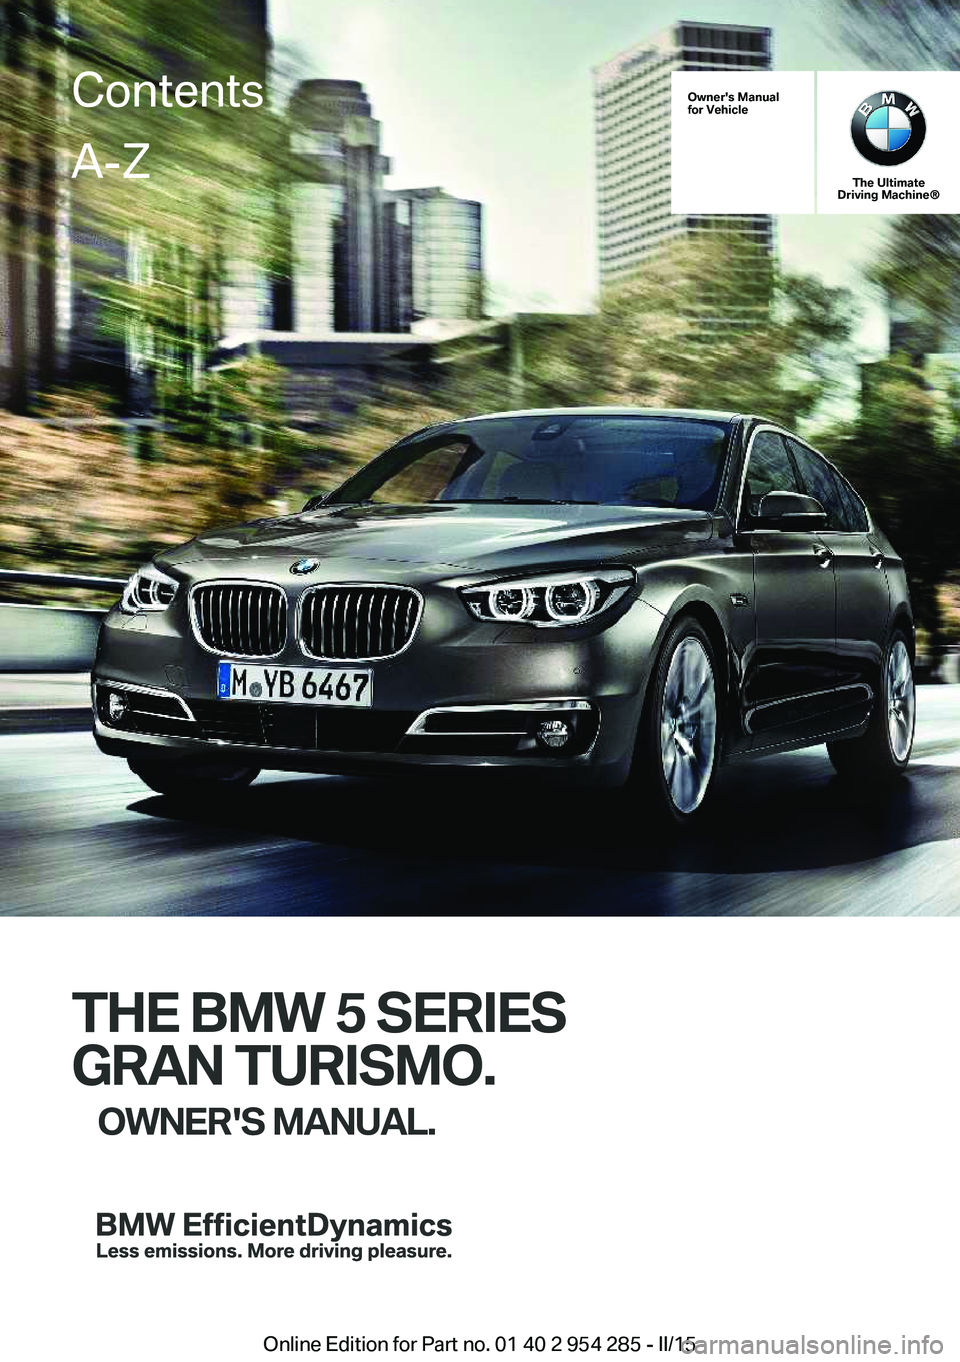 BMW 5 SERIES GRAN TURISMO 2015  Owners Manual Owner's Manual
for Vehicle
The Ultimate
Driving Machine®
THE BMW 5 SERIES
GRAN TURISMO. OWNER'S MANUAL.
ContentsA-Z
Online Edition for Part no. 01 40 2 954 285 - II/15   